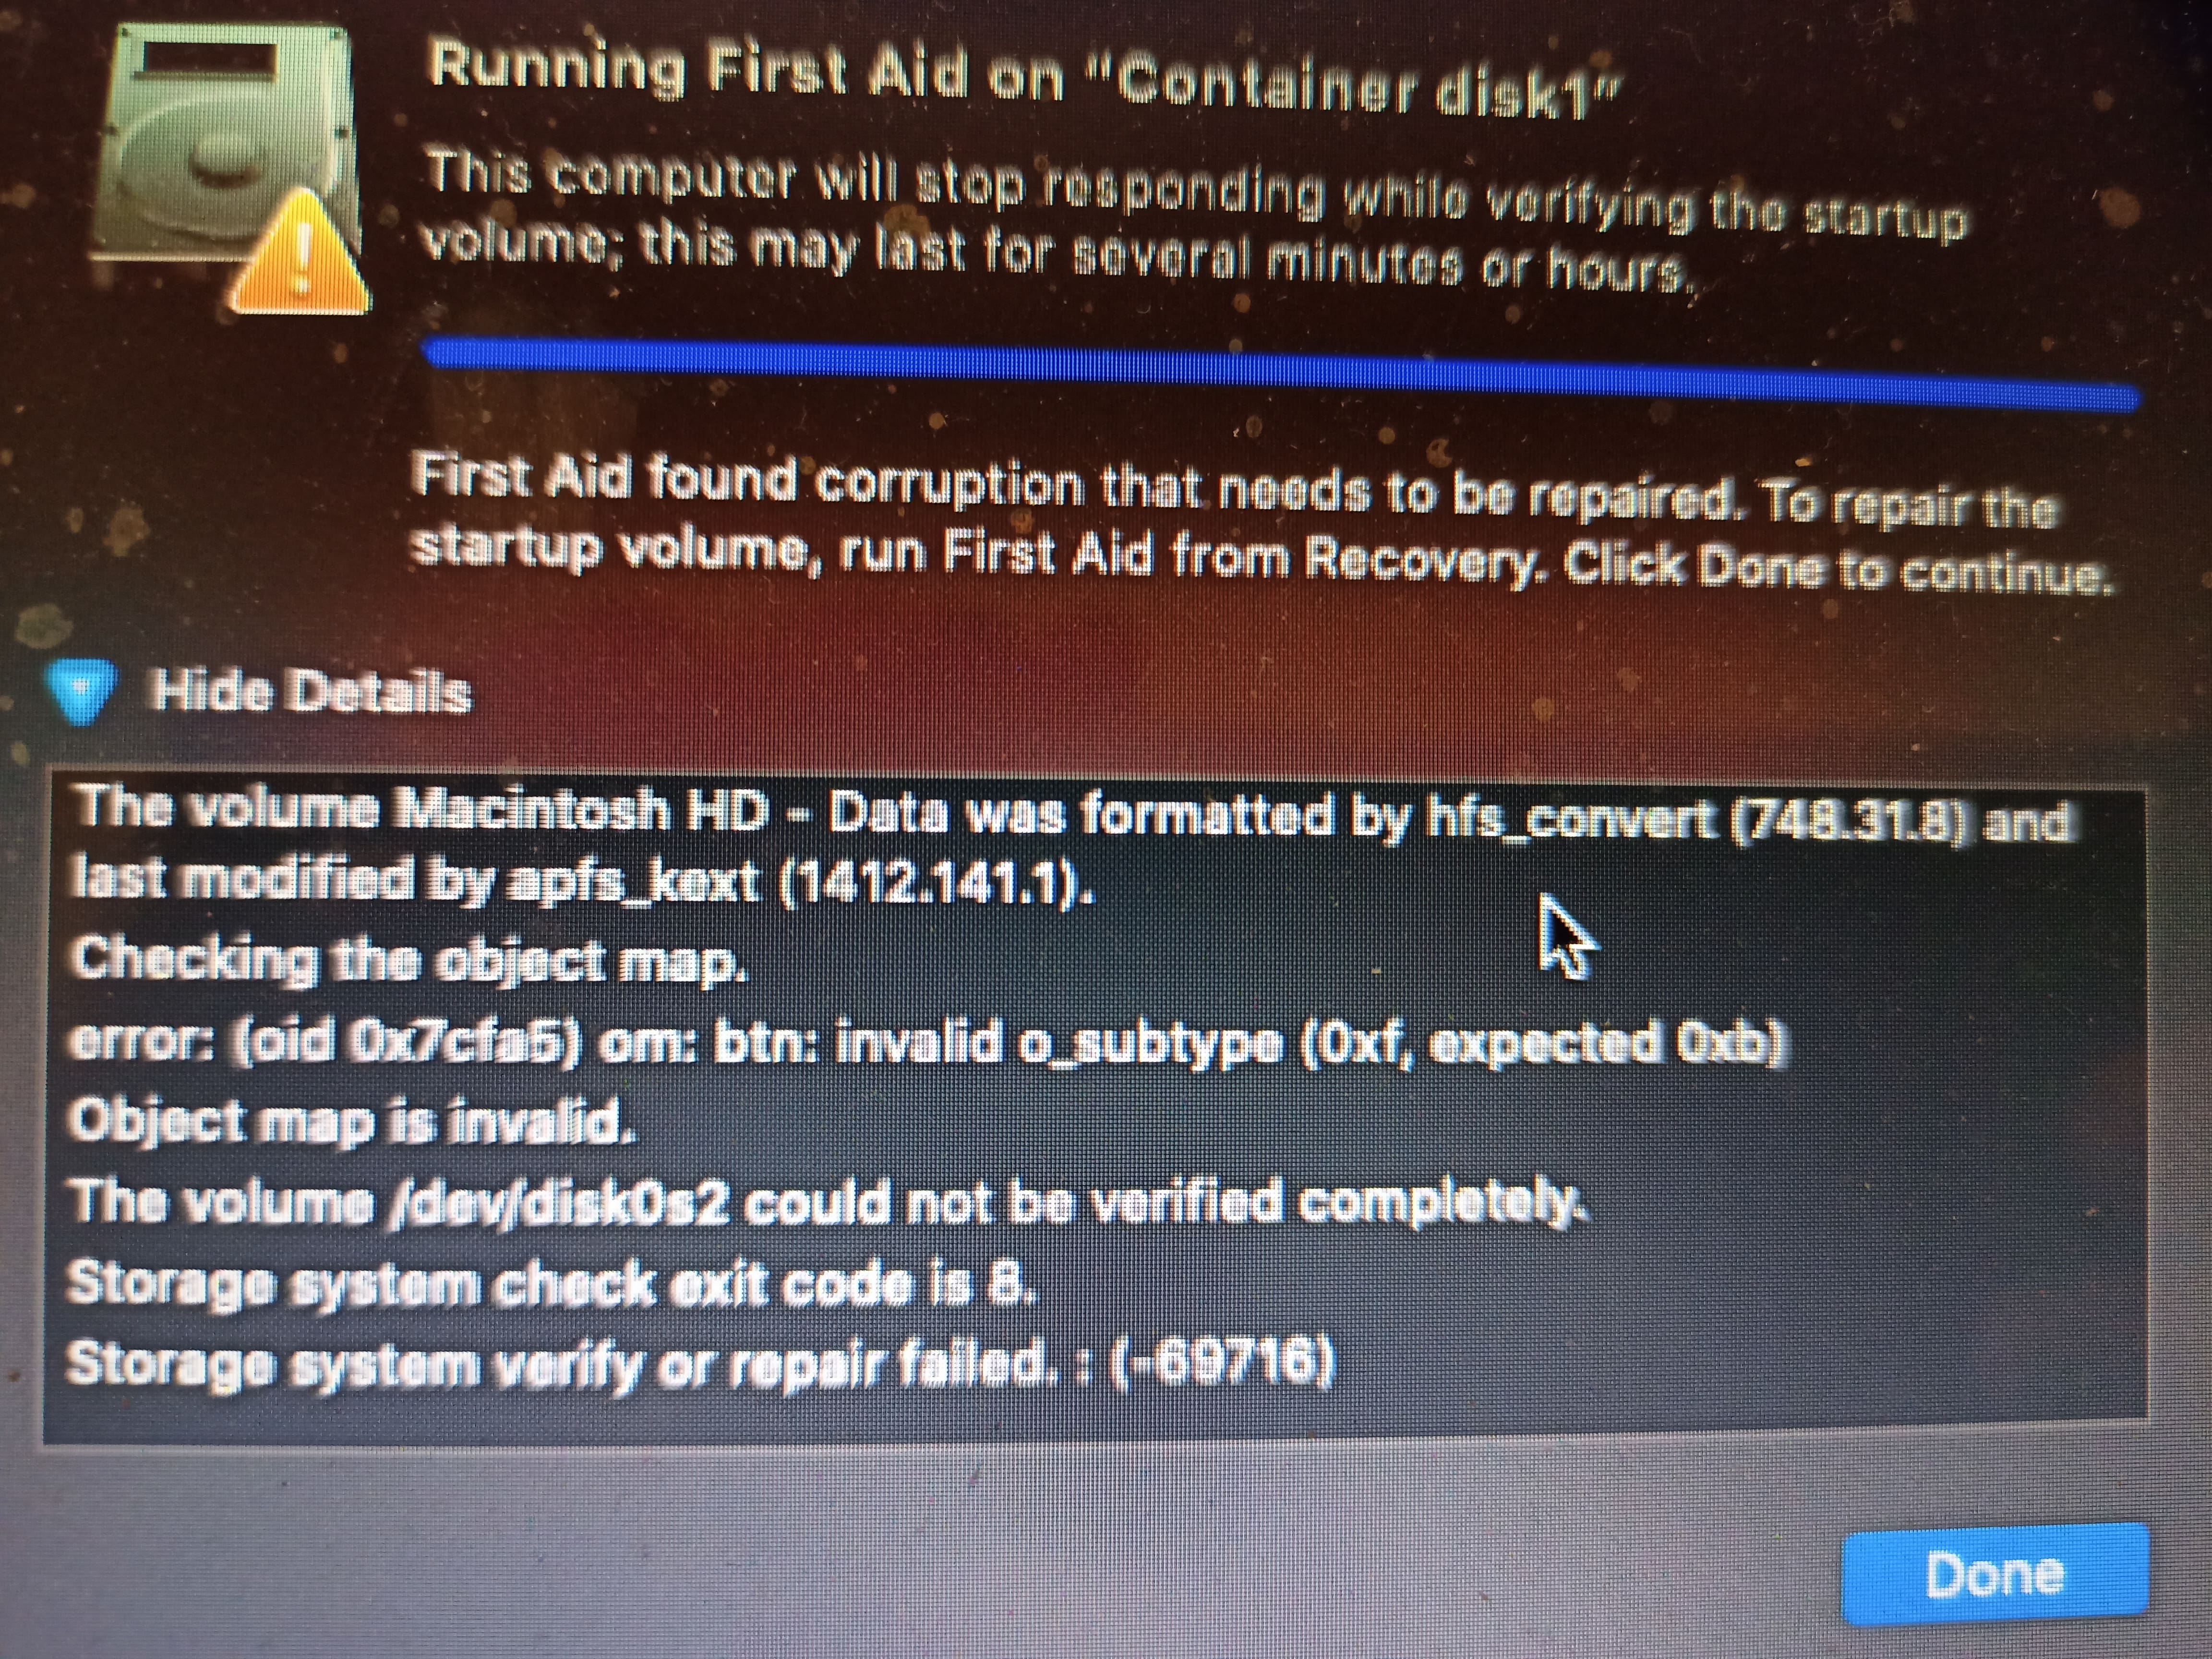 Solved: The volume Macintosh HD was found corrupt and needs to be repaired